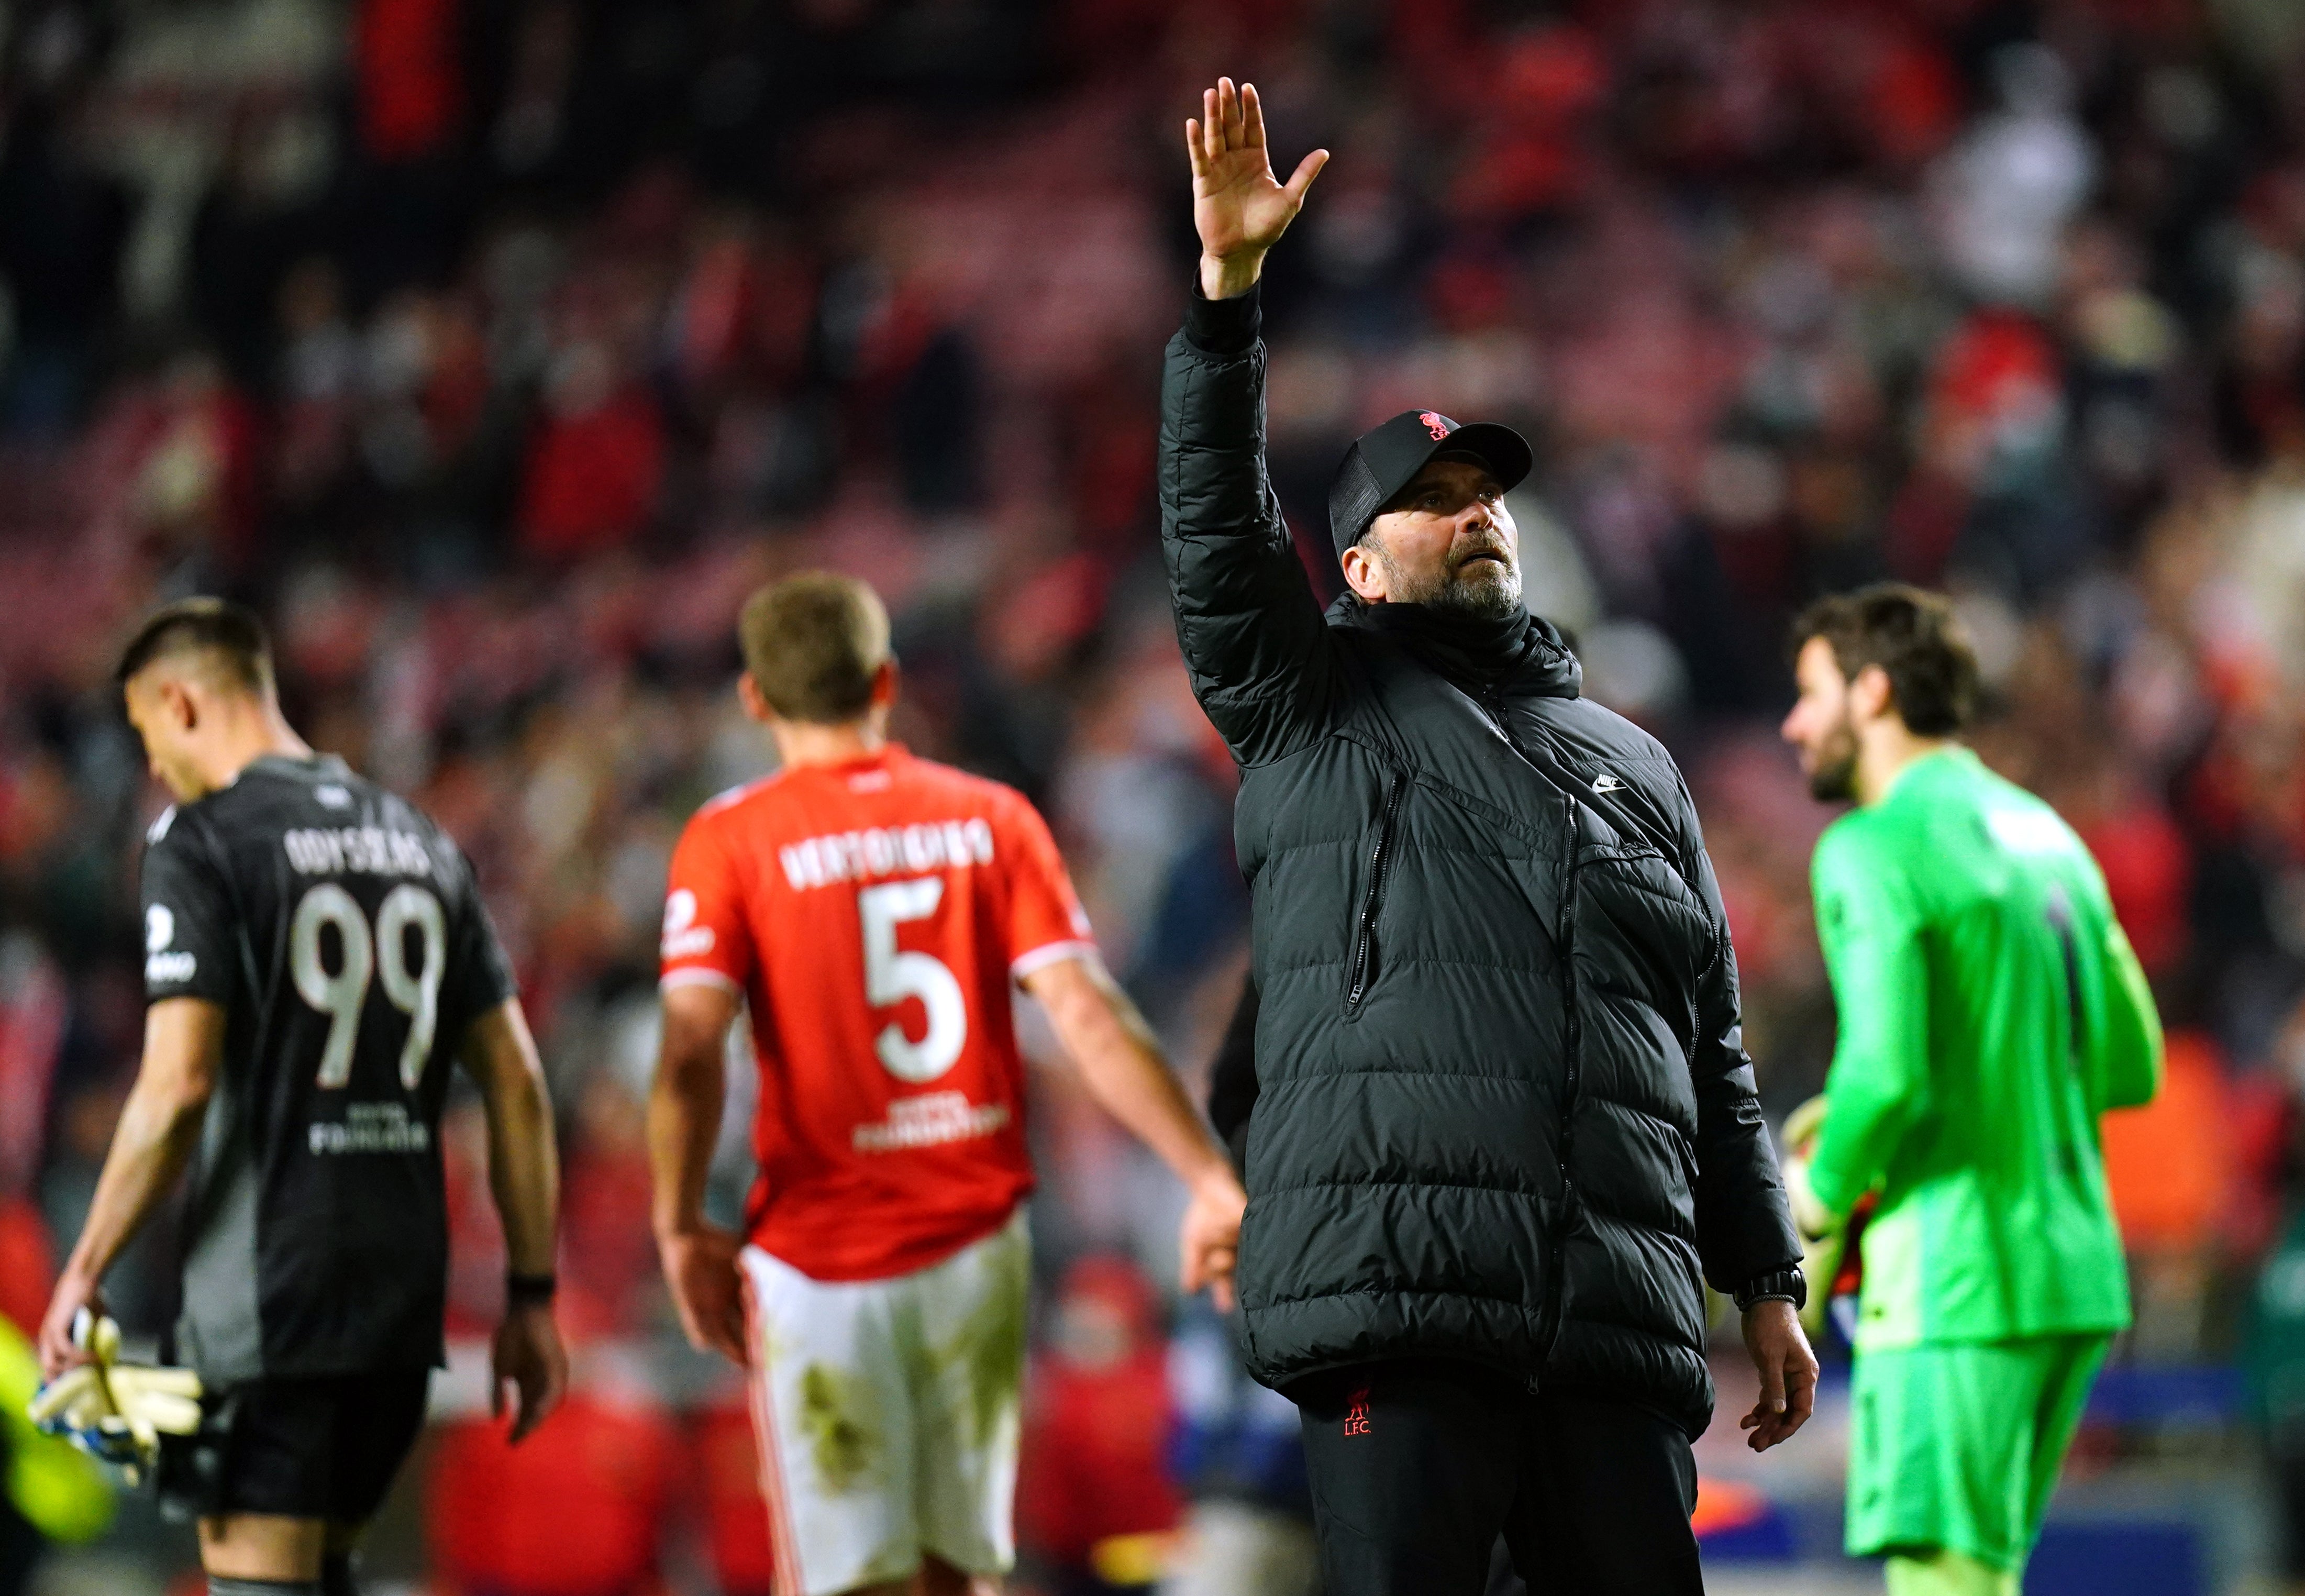 Jurgen Klopp salutes the fans after victory over Benfica (Adam Davy/PA)